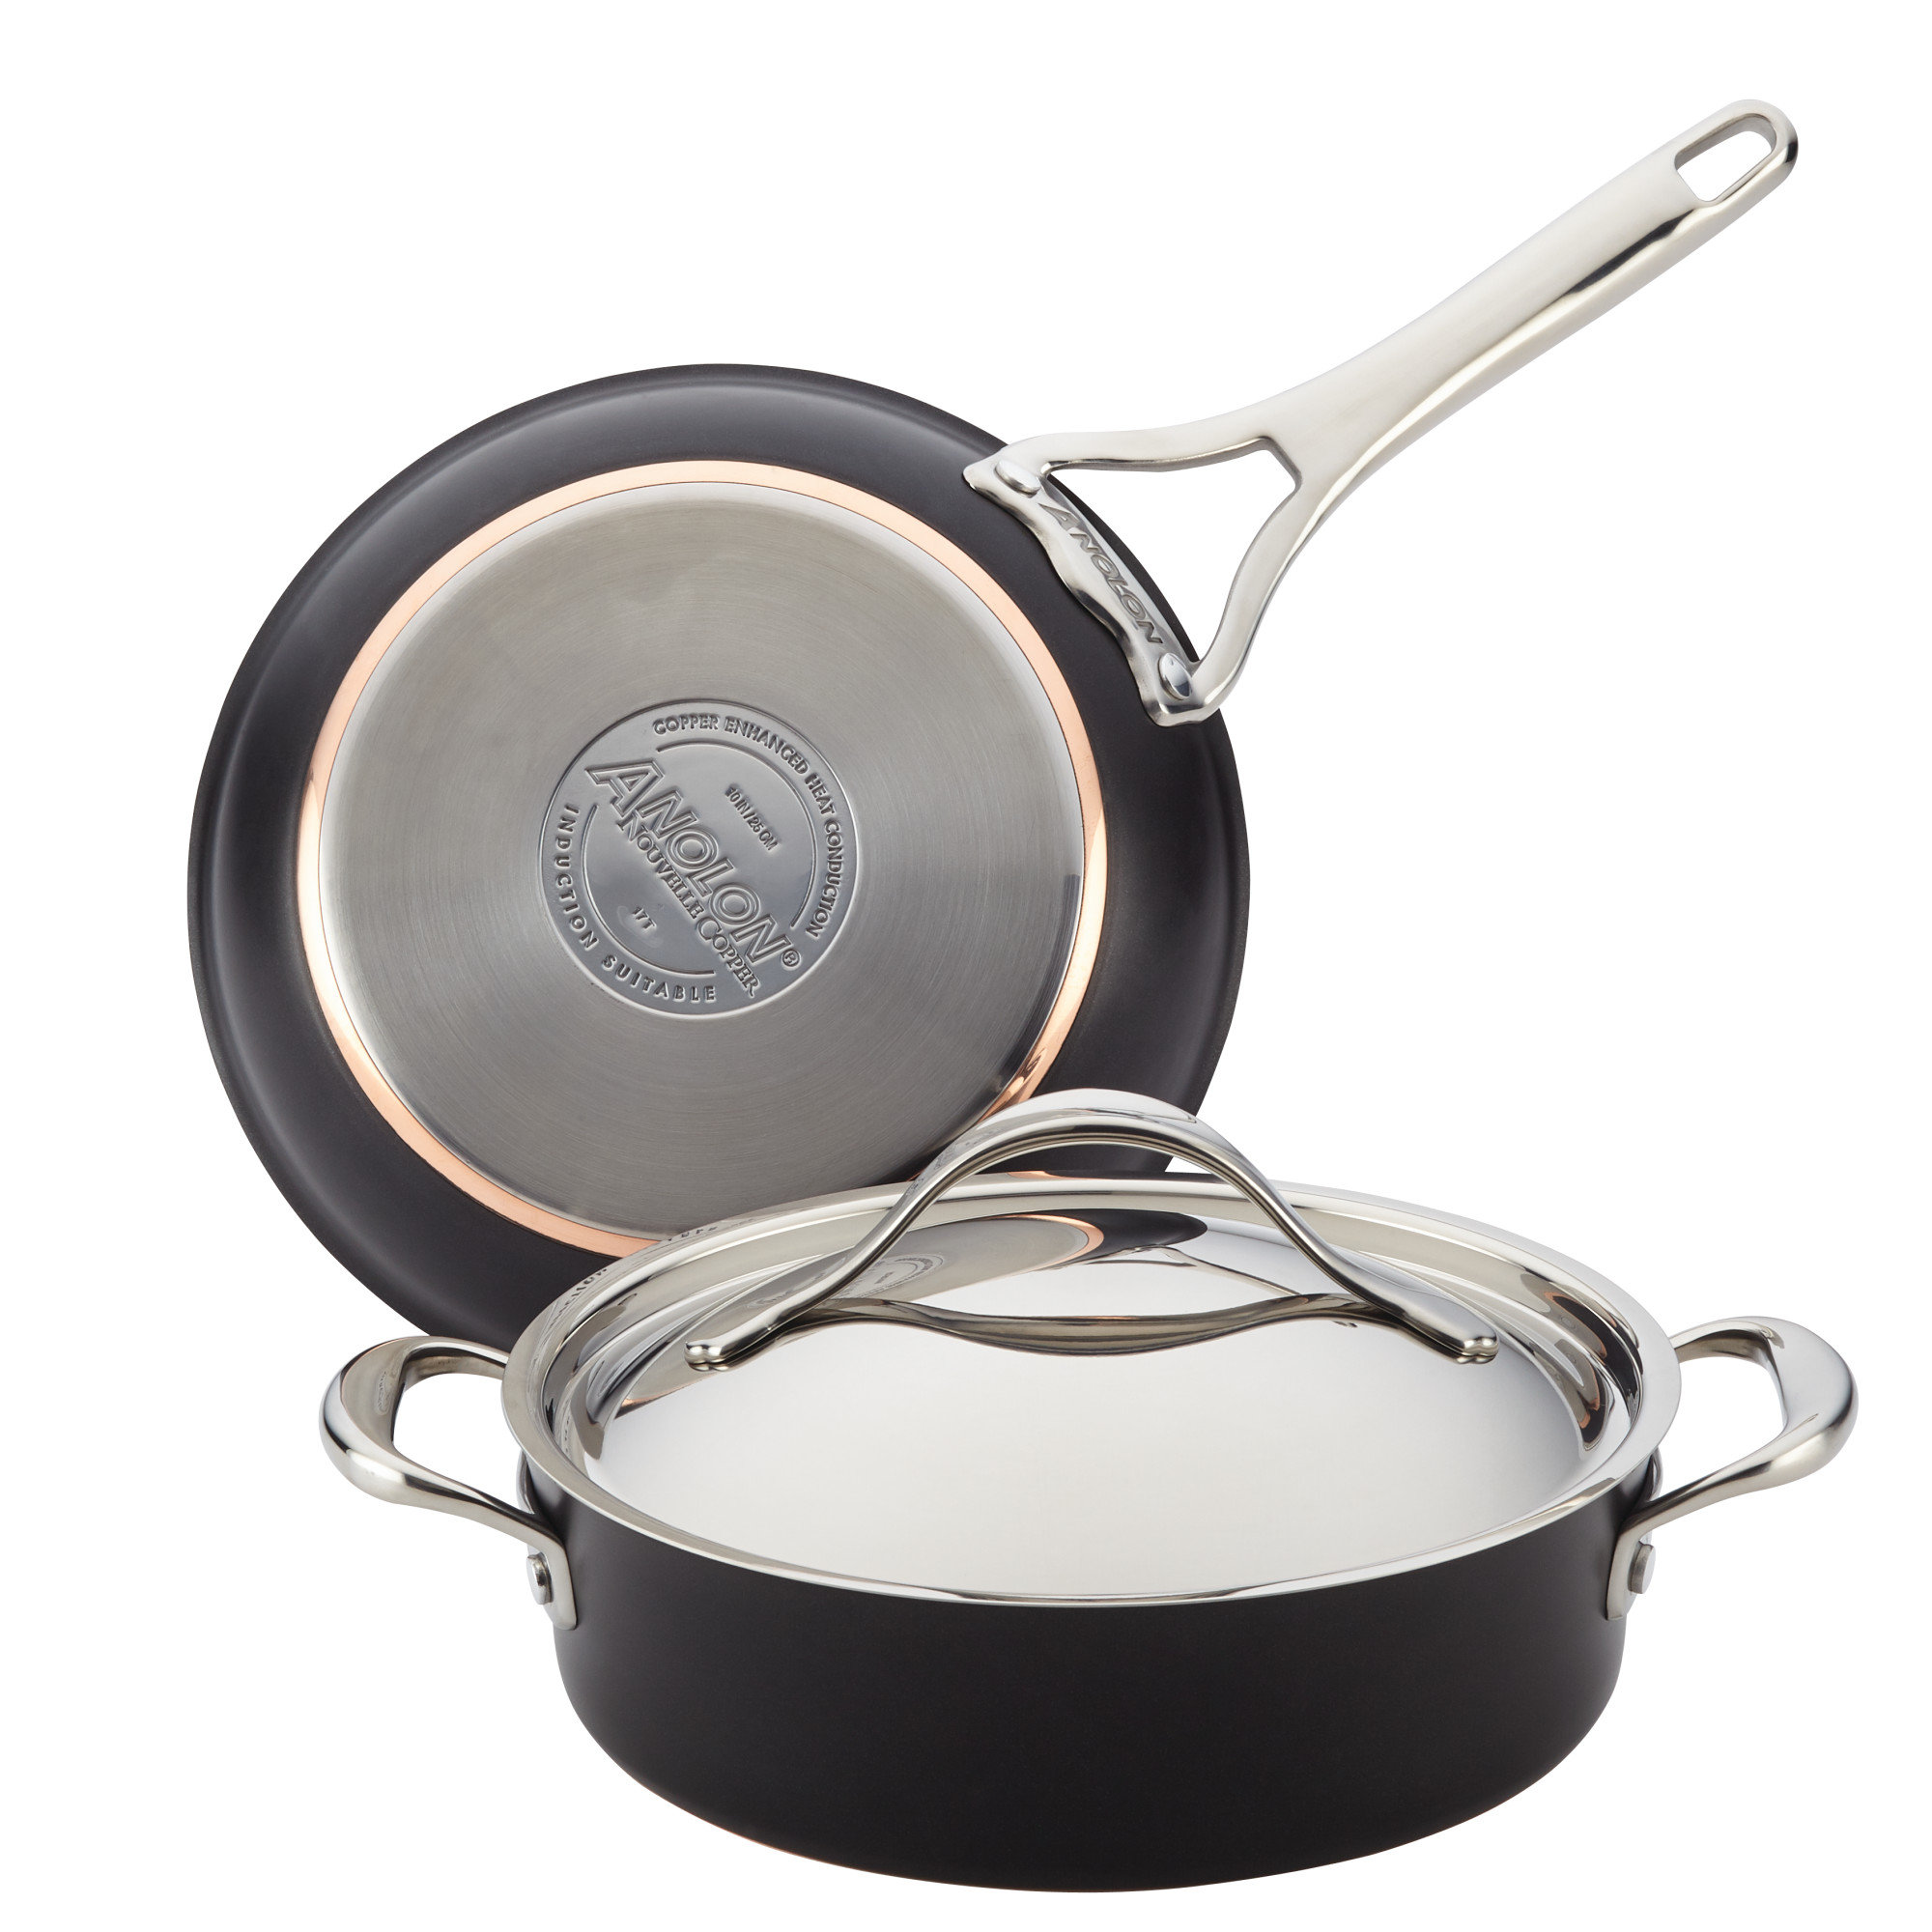 HYBRID NON-STICK ONYX COOKWARE™ FRYING PAN WITH DETACHABLE HANDLE 3-PC SET